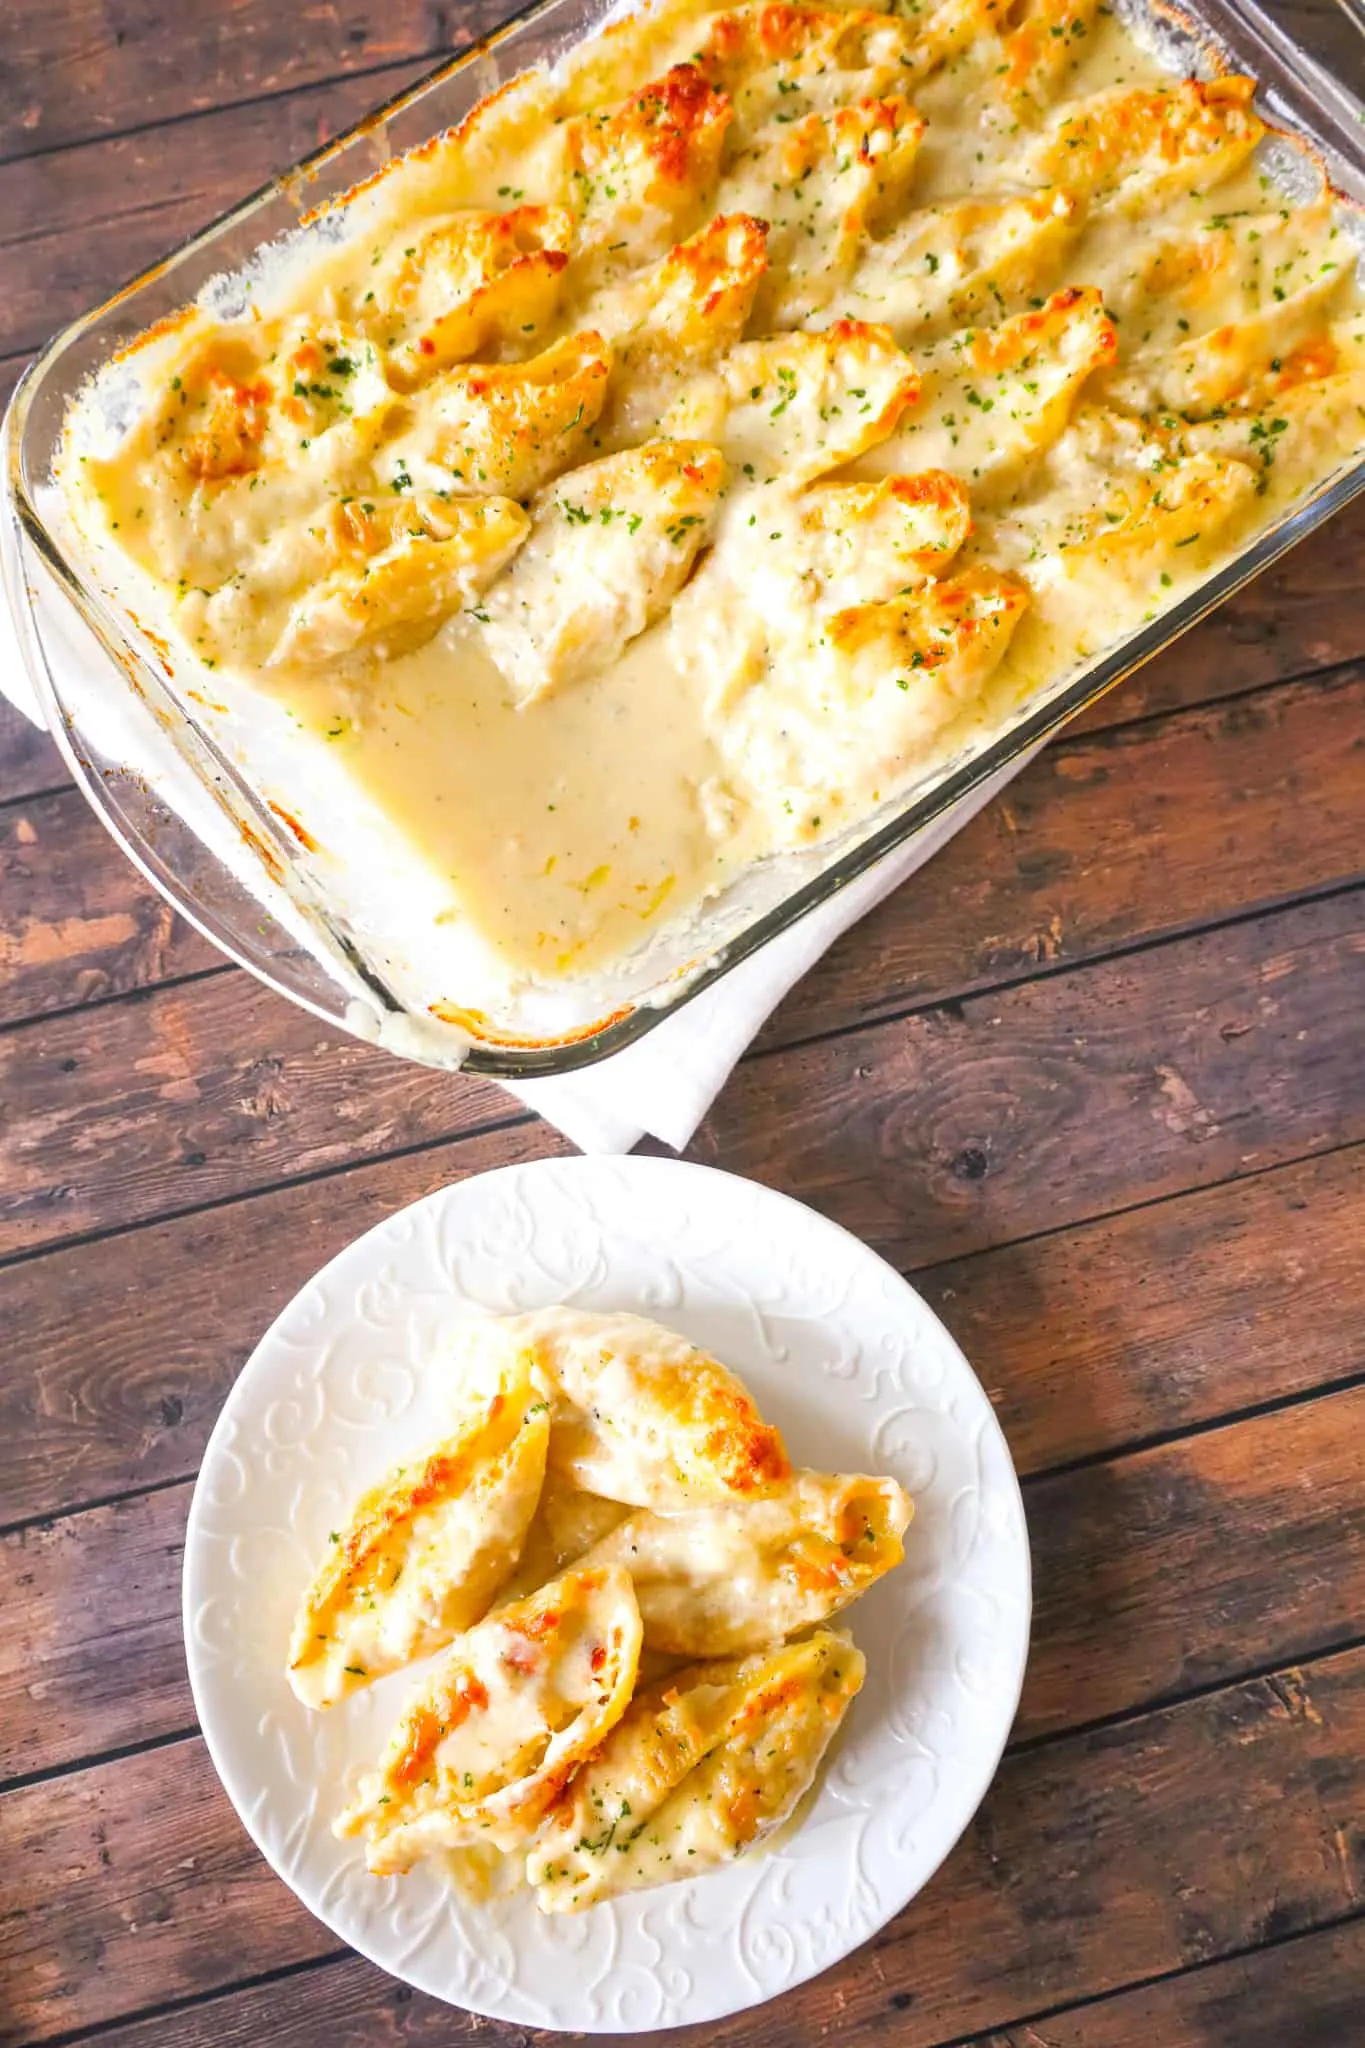 Chicken Alfredo Stuffed Shells are a delicious baked pasta recipe loaded with ricotta cheese, shredded chicken, mozzarella and parmesan all in a creamy garlic sauce.